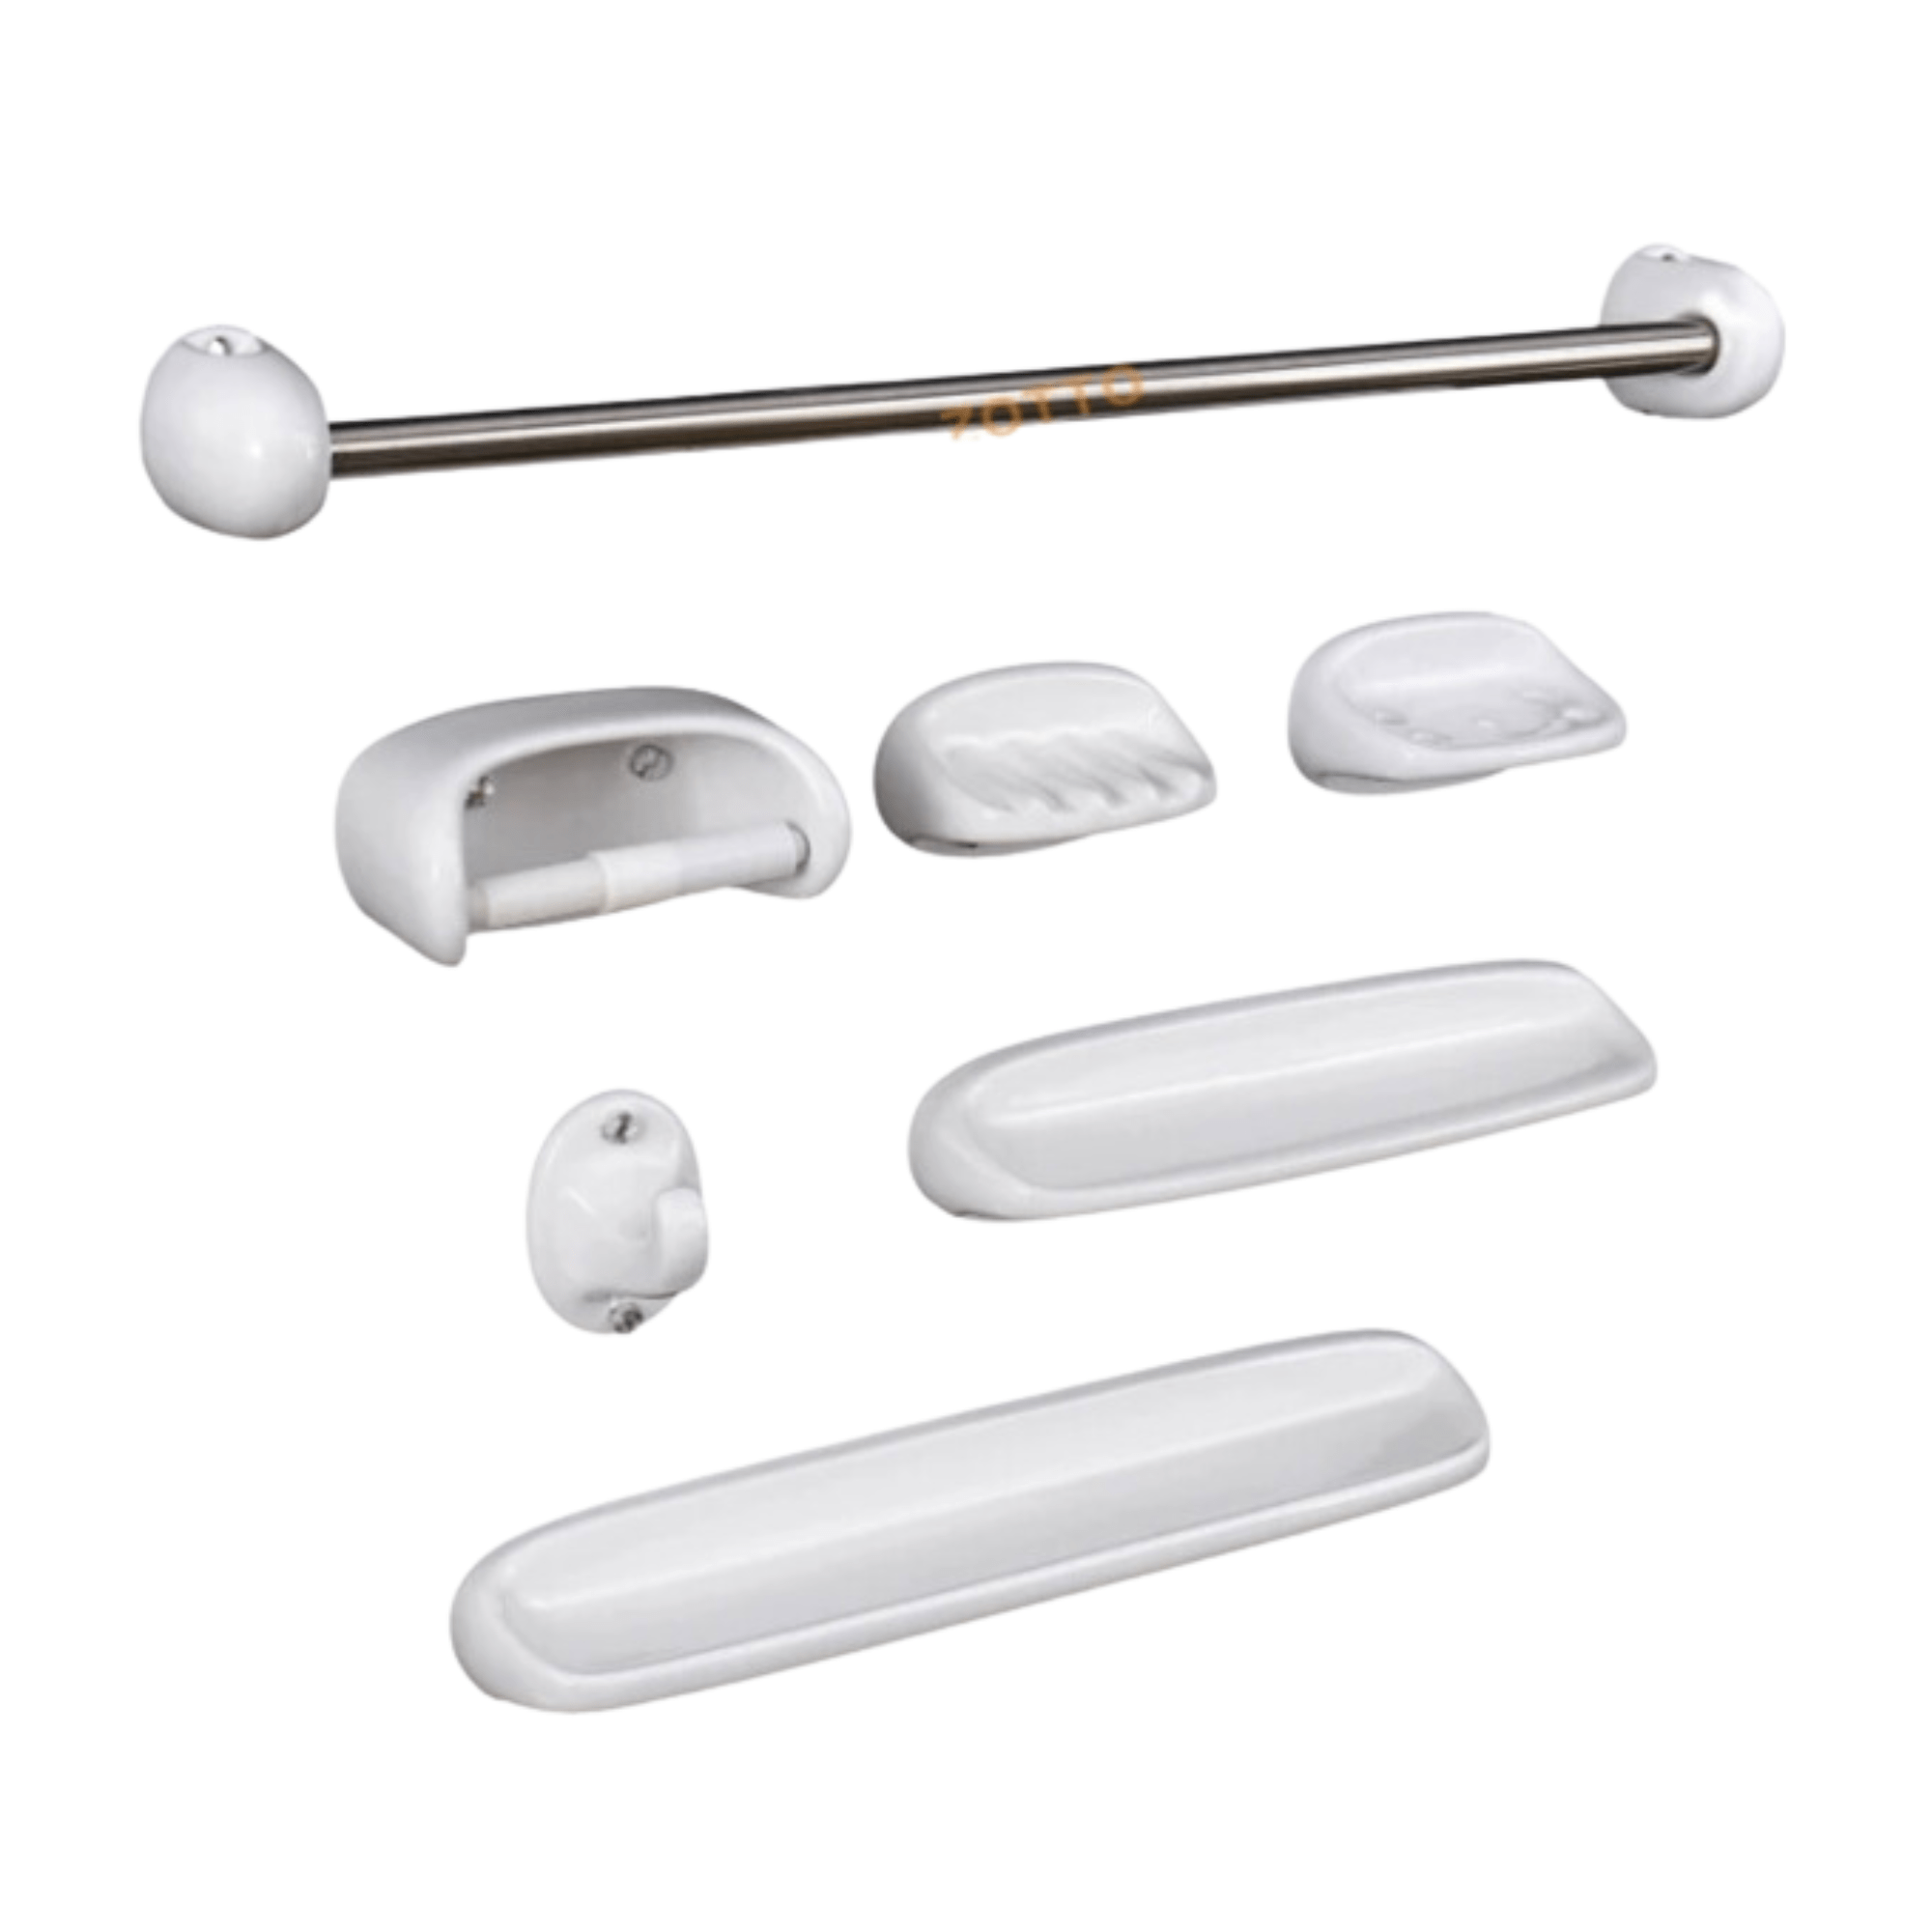 Shop Zotto White ABS Plastic 7 Pieces Bathroom Accessories Set - ZT-925 | Buy Online at Supply Master Accra, Ghana Bathroom Accessories Buy Tools hardware Building materials